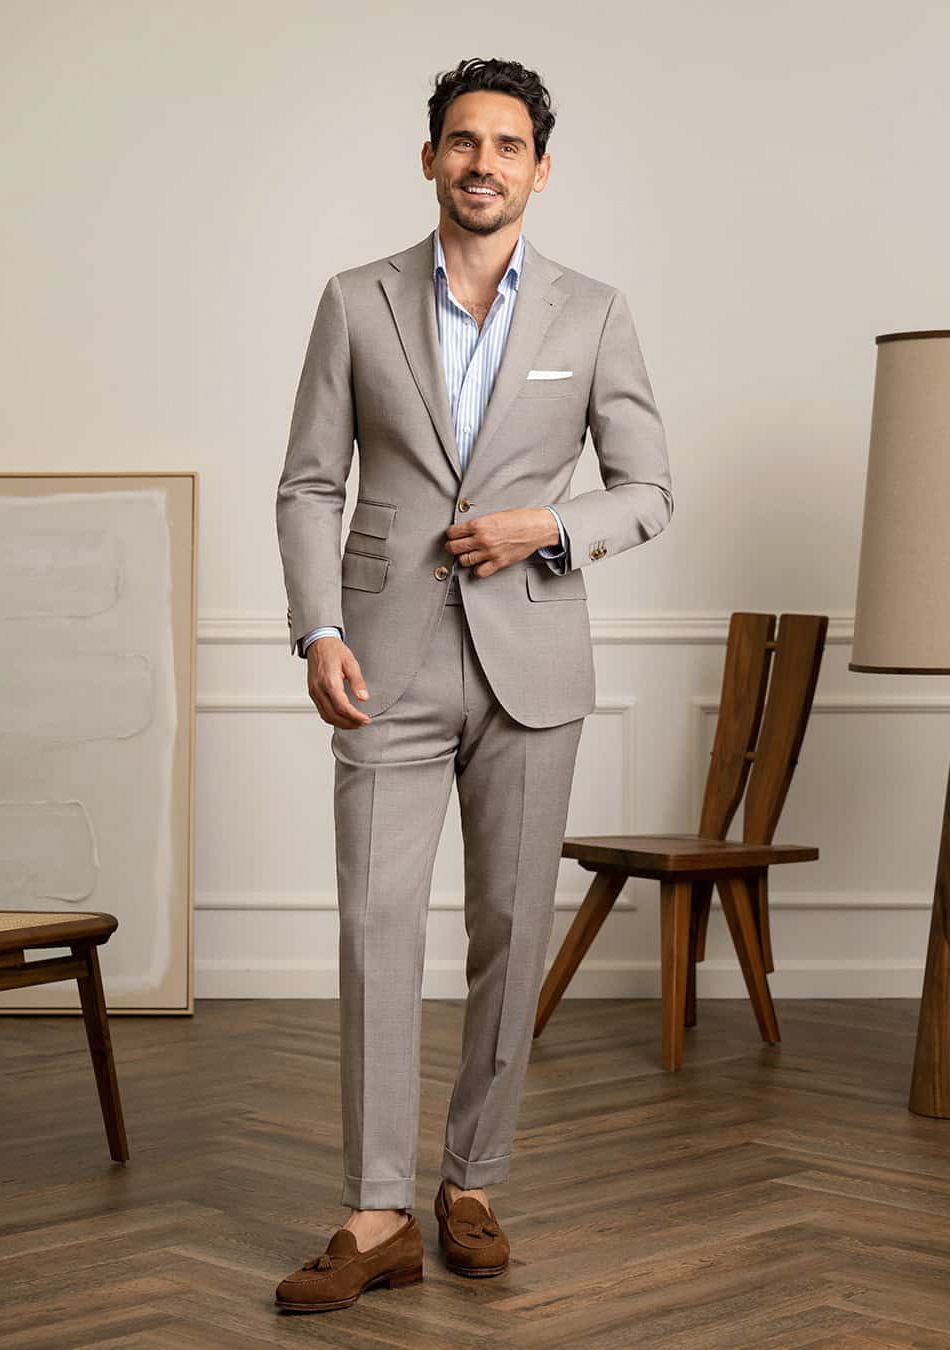 Grey suit, blue dress shirt, and tan suede loafers